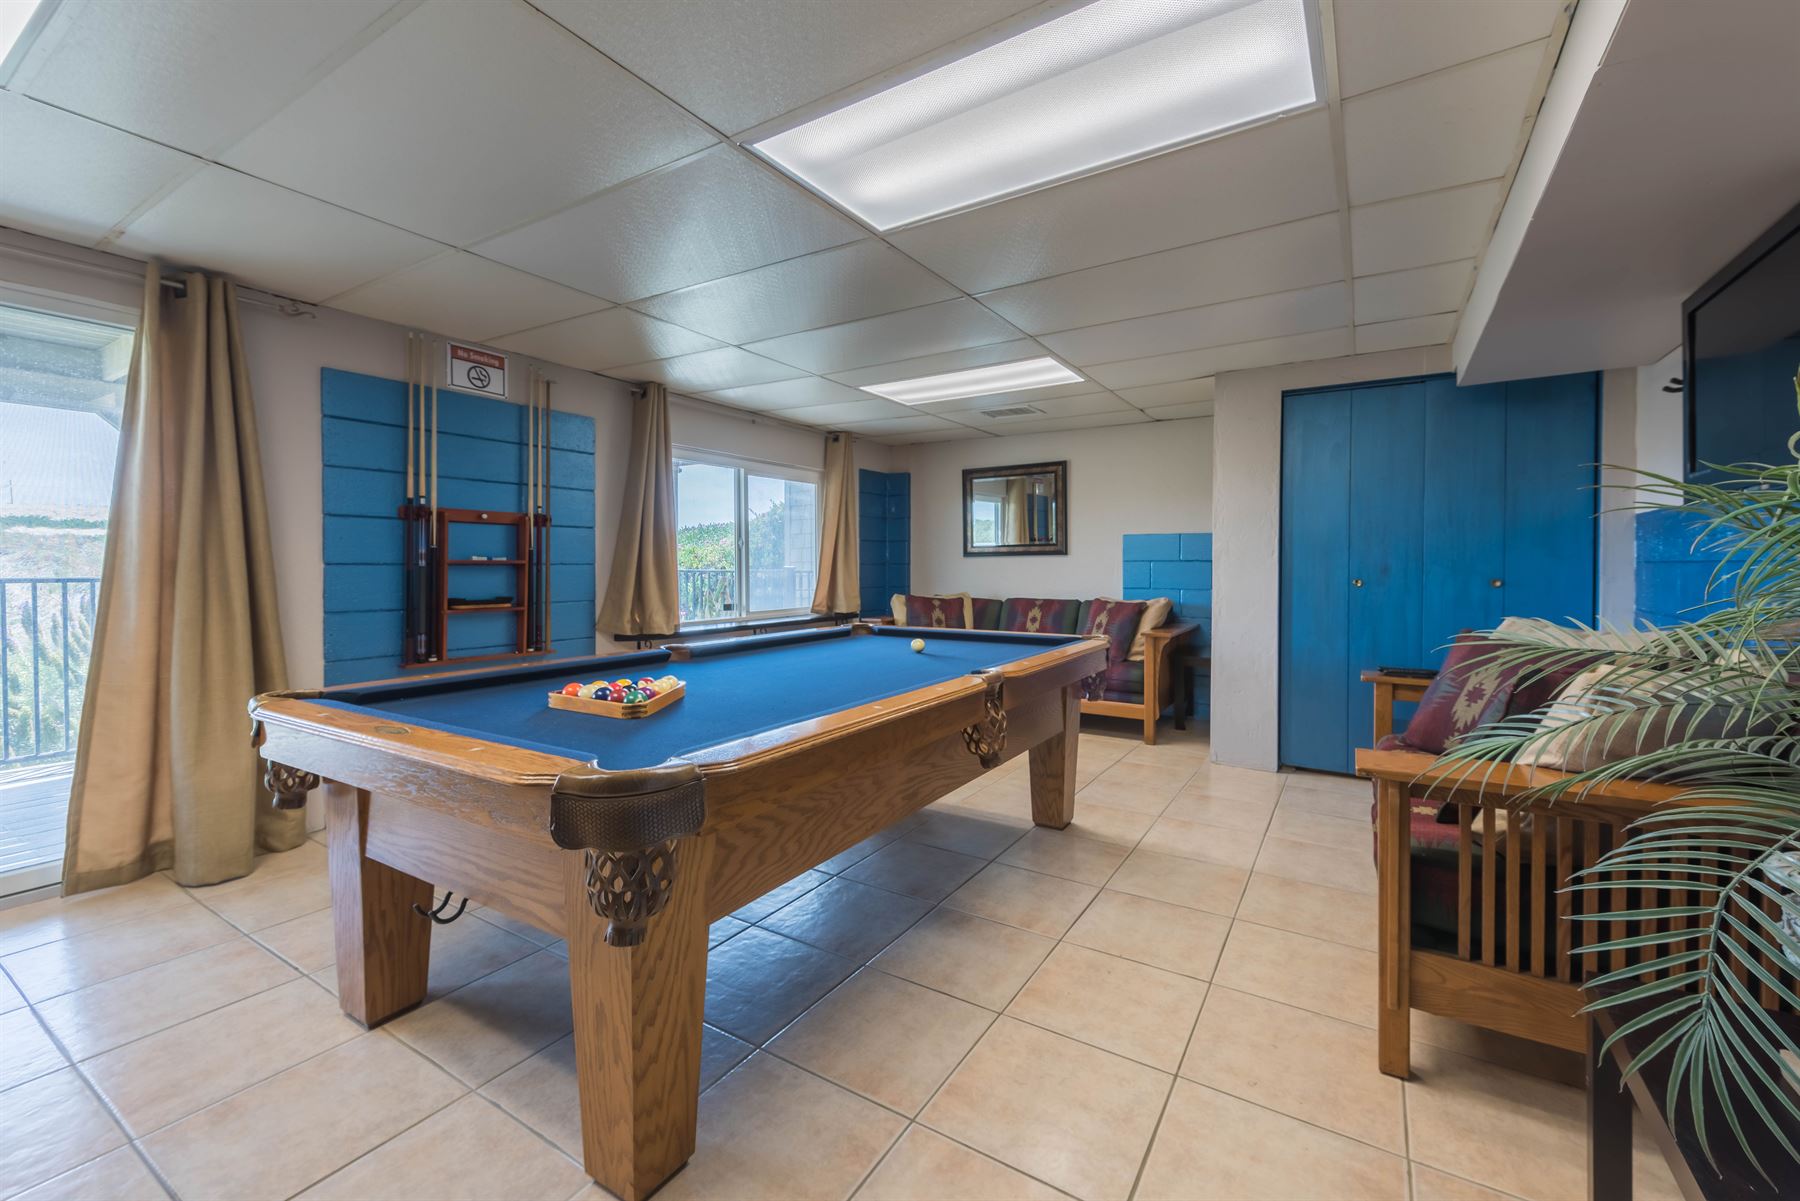 Oceanview Hideaway - Interior - Game room with pool table